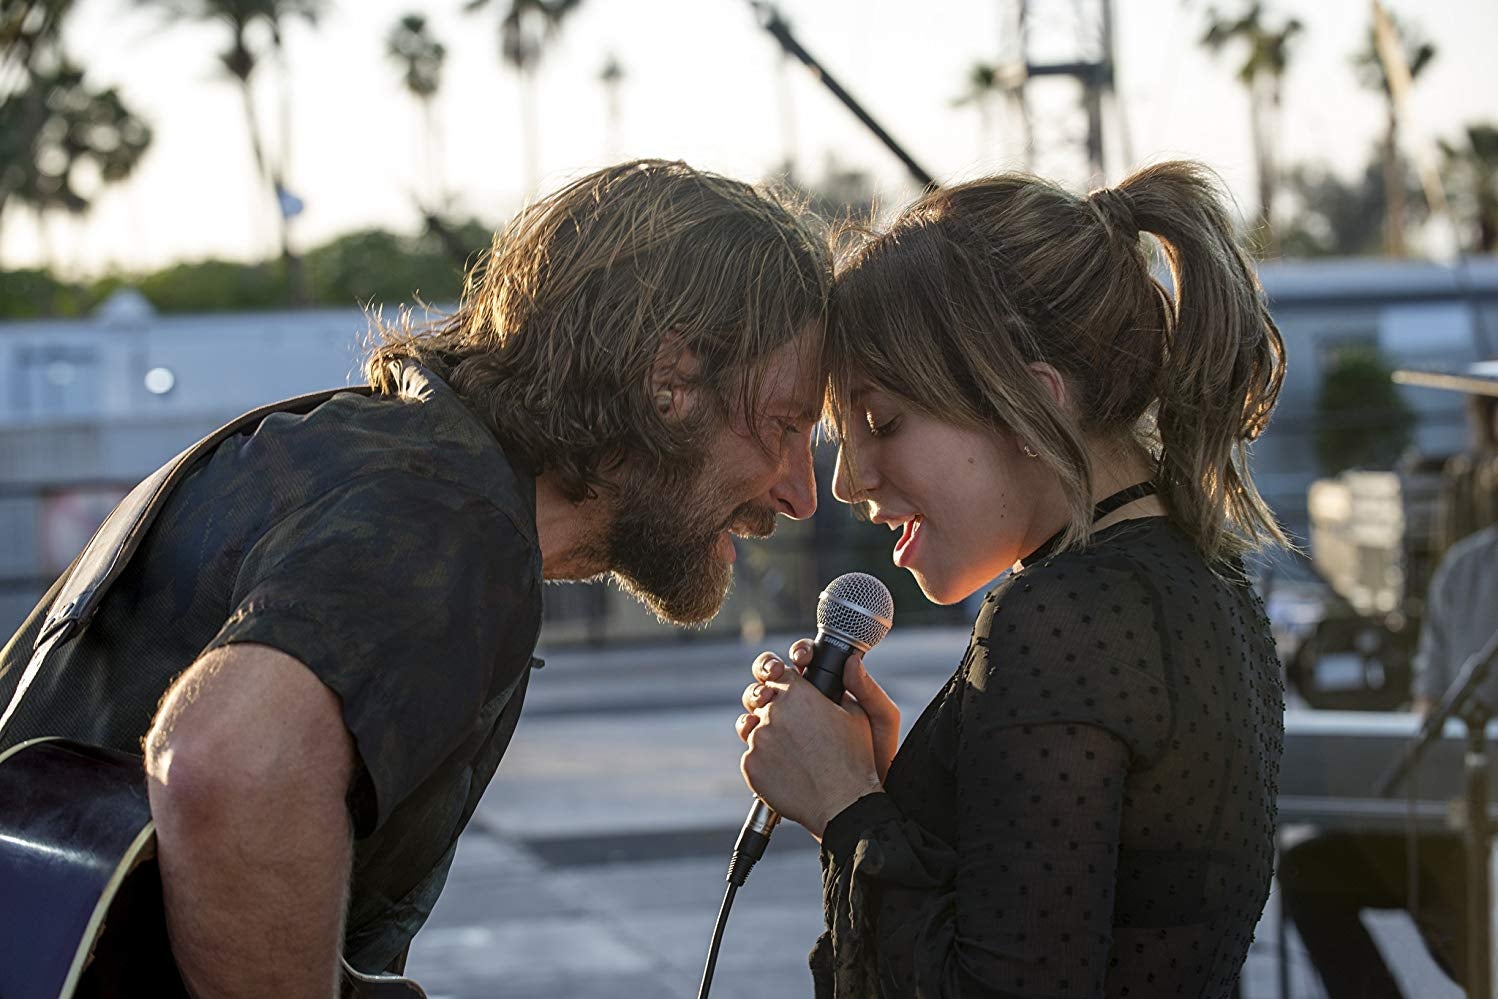 Bradley Cooper, with long, lank hair and a beard, presses his forehead to a brunette Lady Gaga's. He holds a guitar and she holds a microphone.